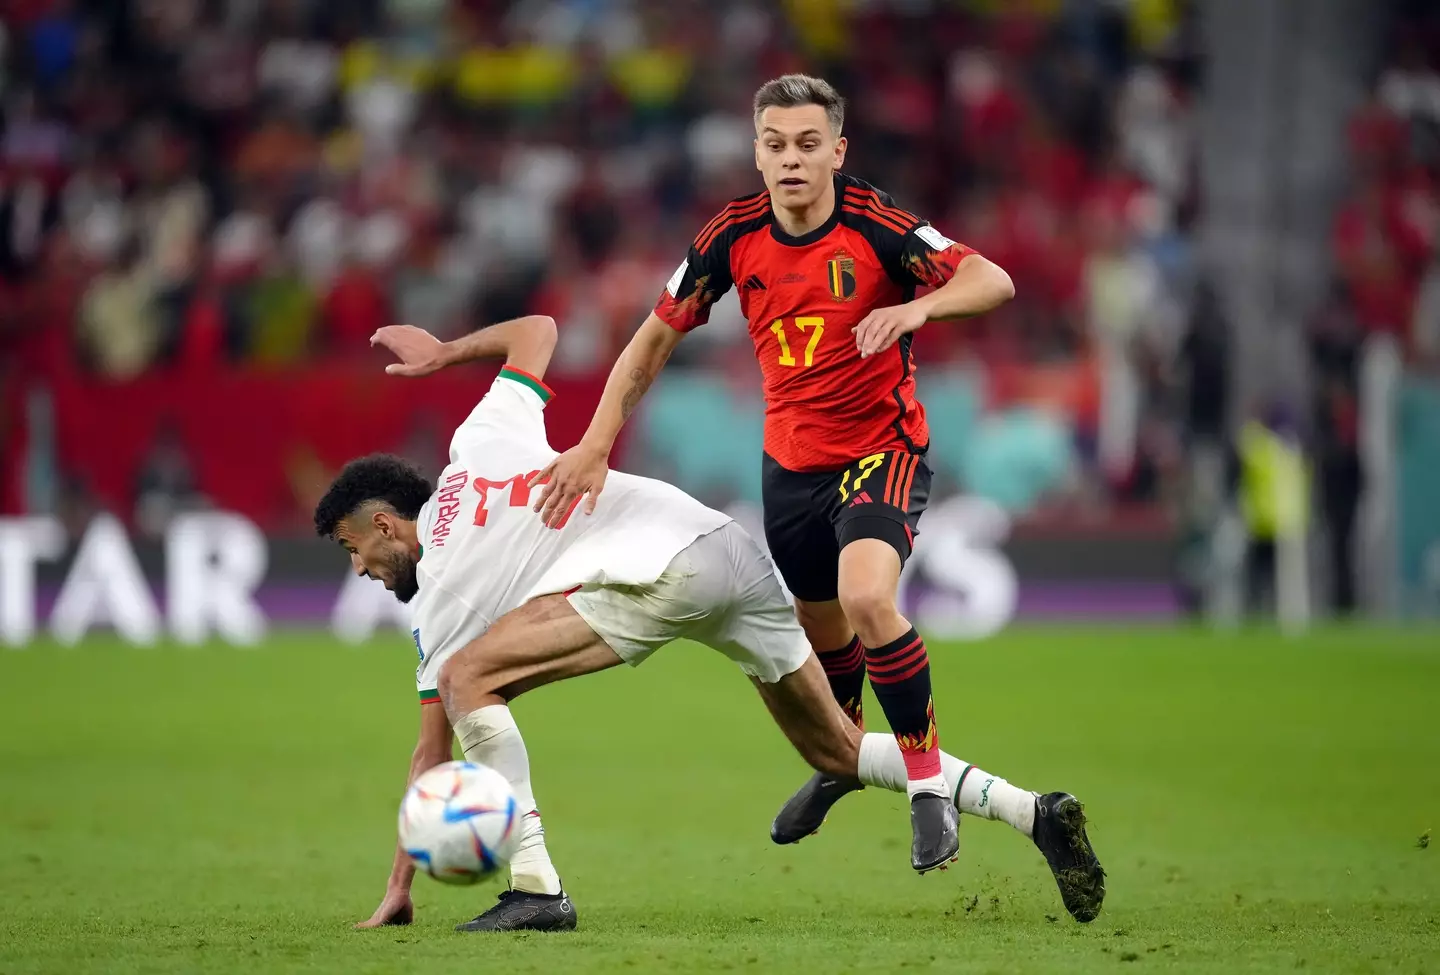 Trossard was included in Belgium's World Cup squad (Image: Alamy)